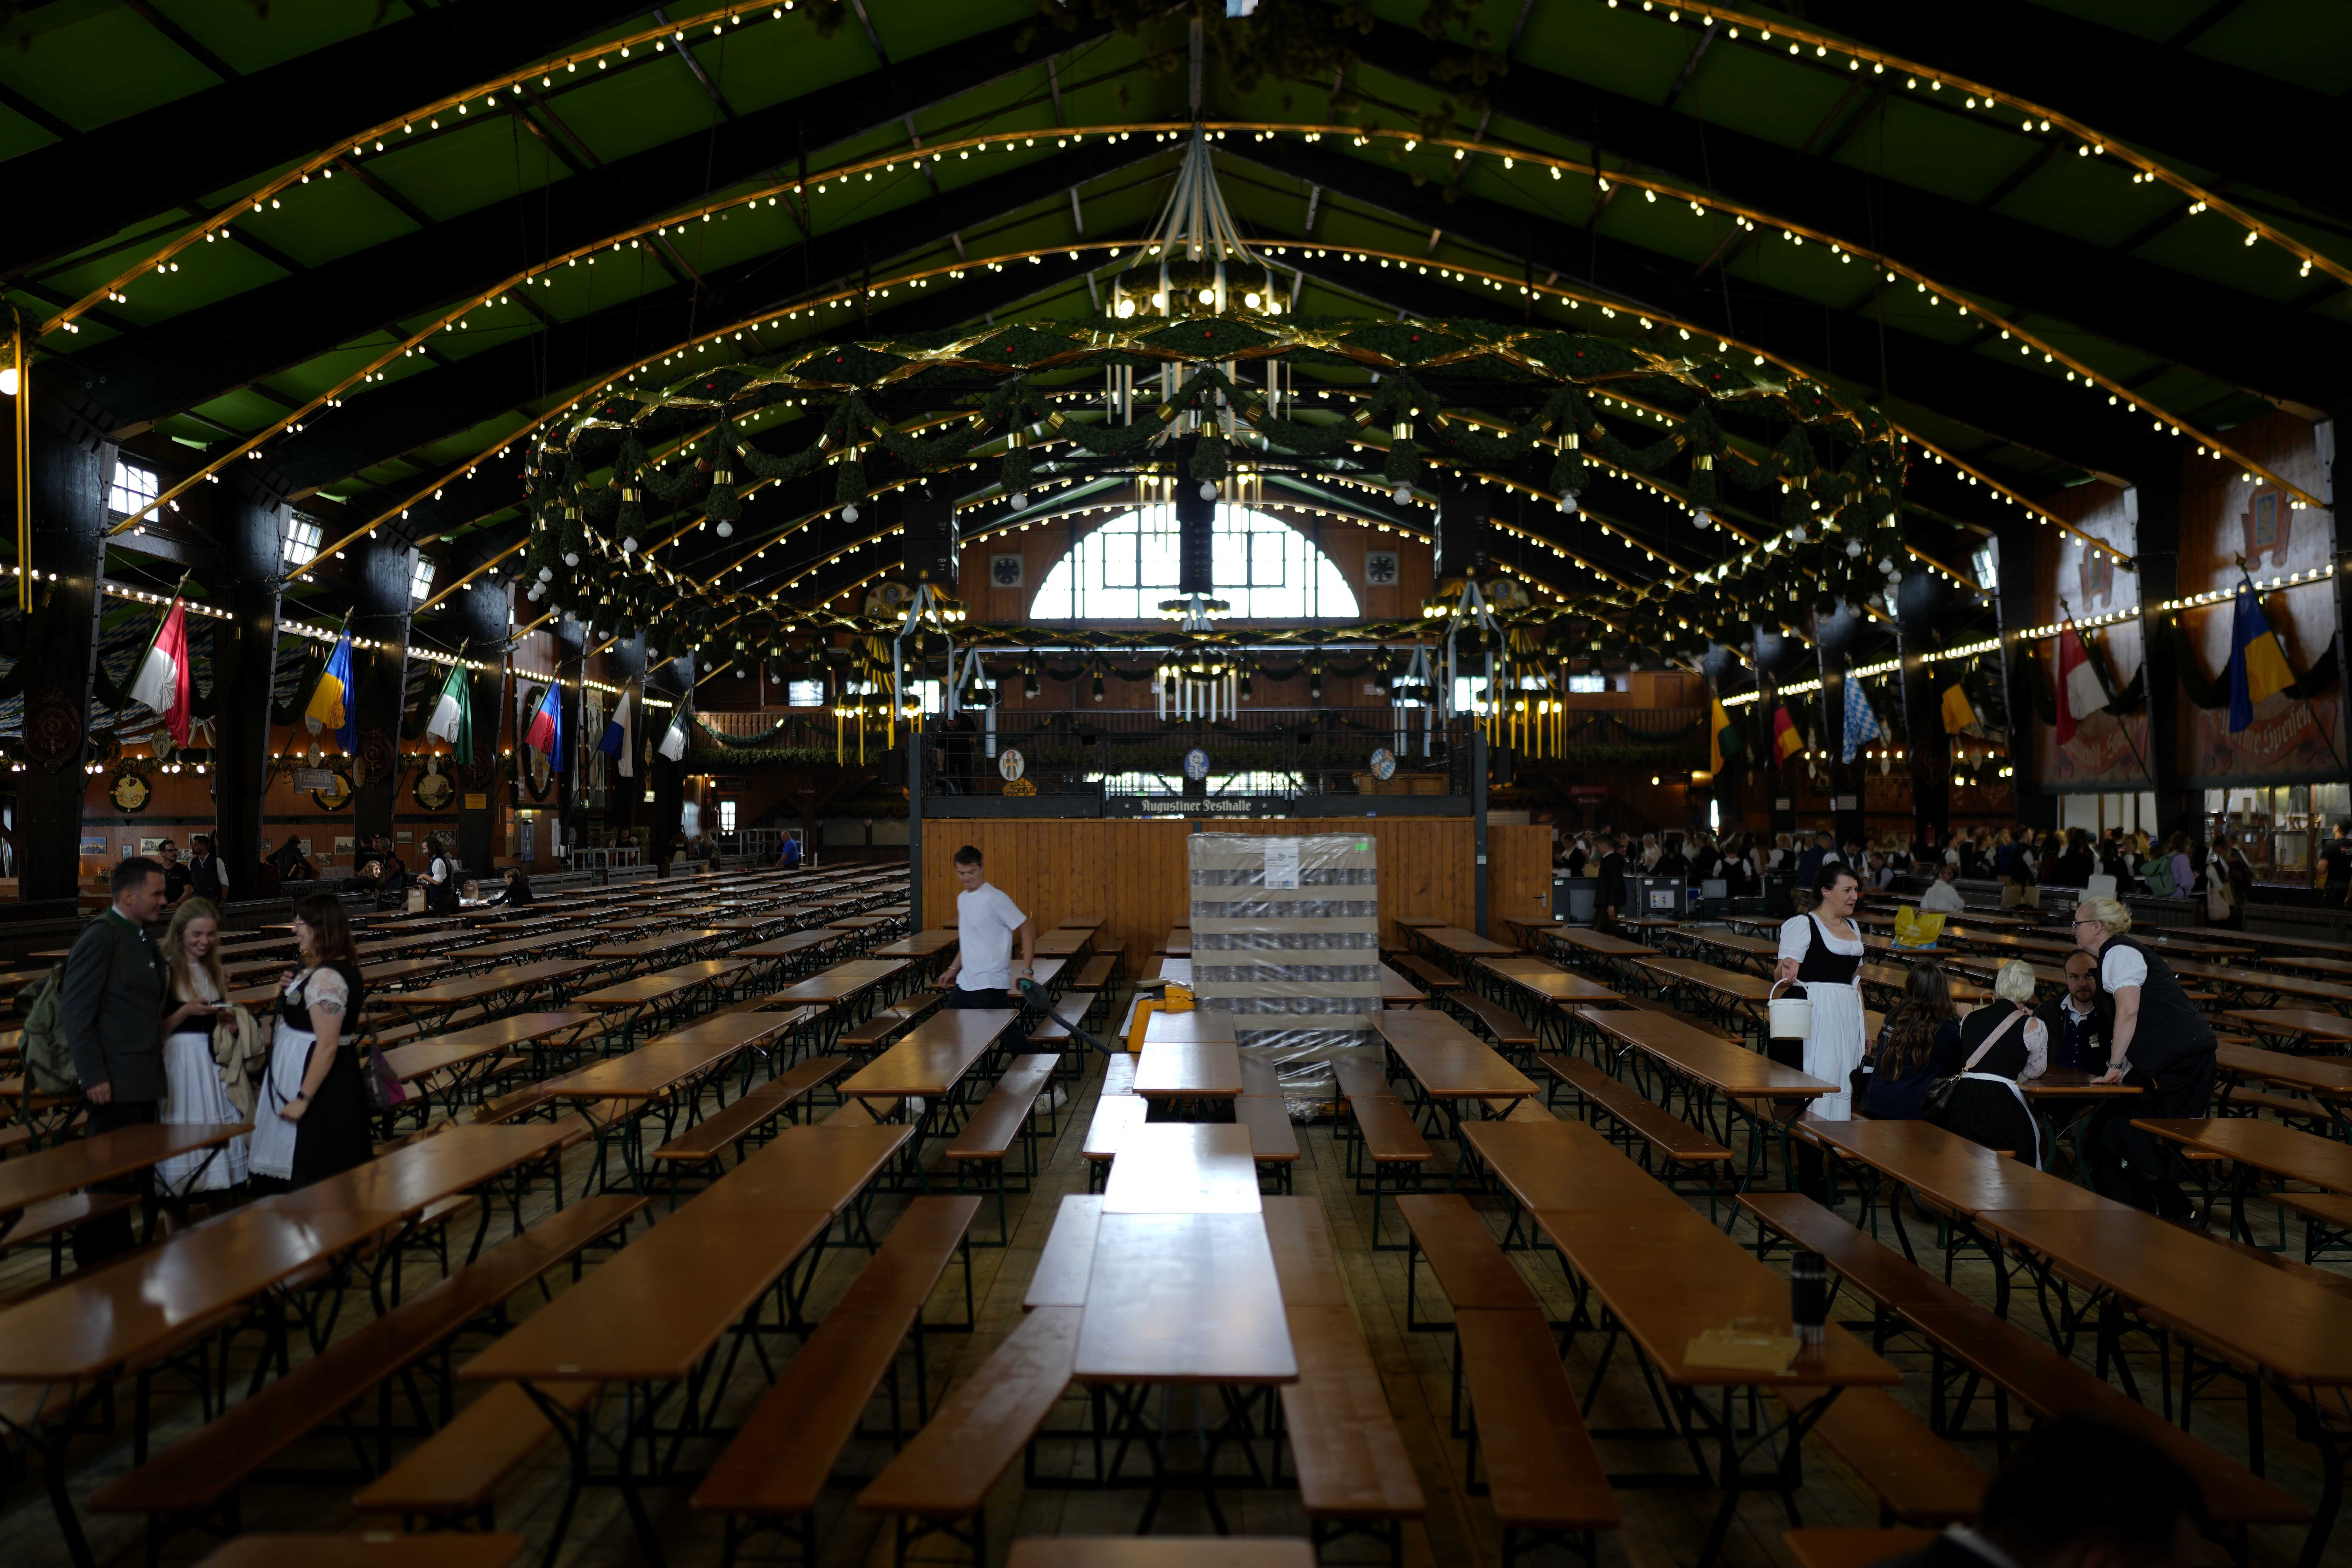 Employees gather in a beer tent during preparations for the 188th Oktoberfest beer festival in Munich, Germany, Thursday, Sept. 14, 2023. The world's largest beer festival will be held from Sept. 16 to Oct. 3, 2023. (AP Photo/Matthias Schrader)

Associated Press/LaPresse
Only Italy and Spain